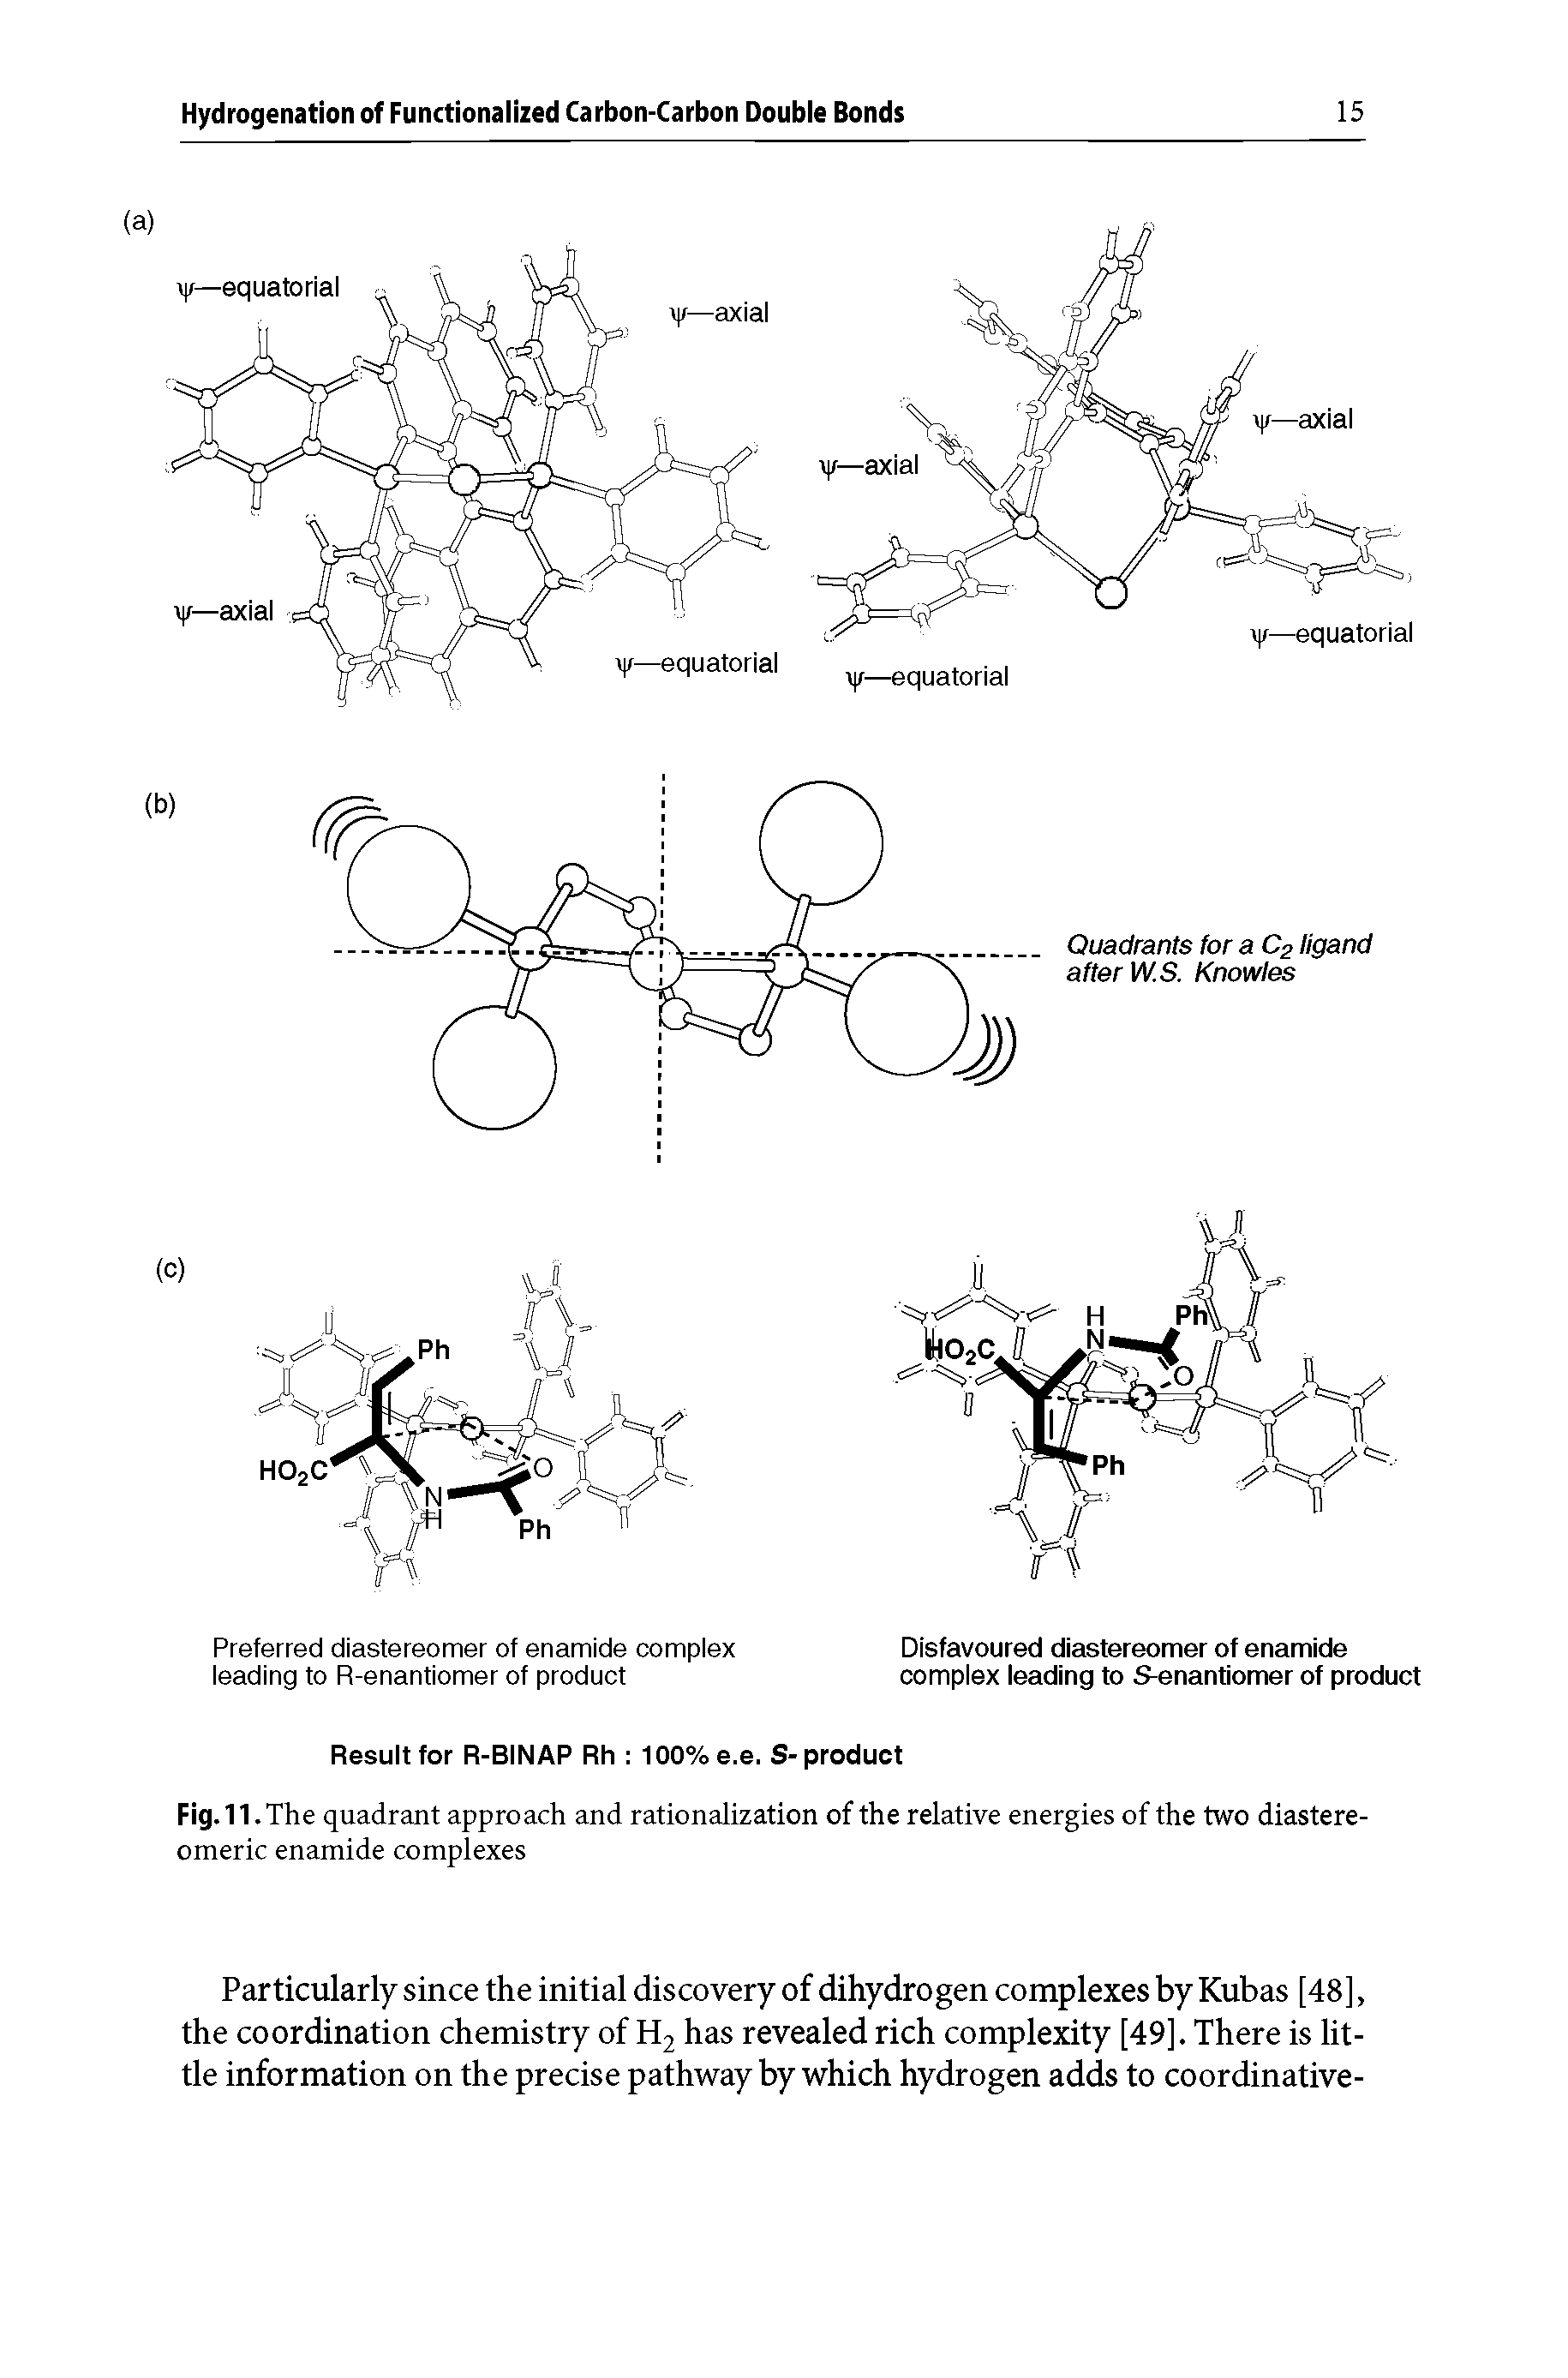 Fig. 11 The quadrant approach and rationalization of the relative energies of the two diastere-omeric enamide complexes...